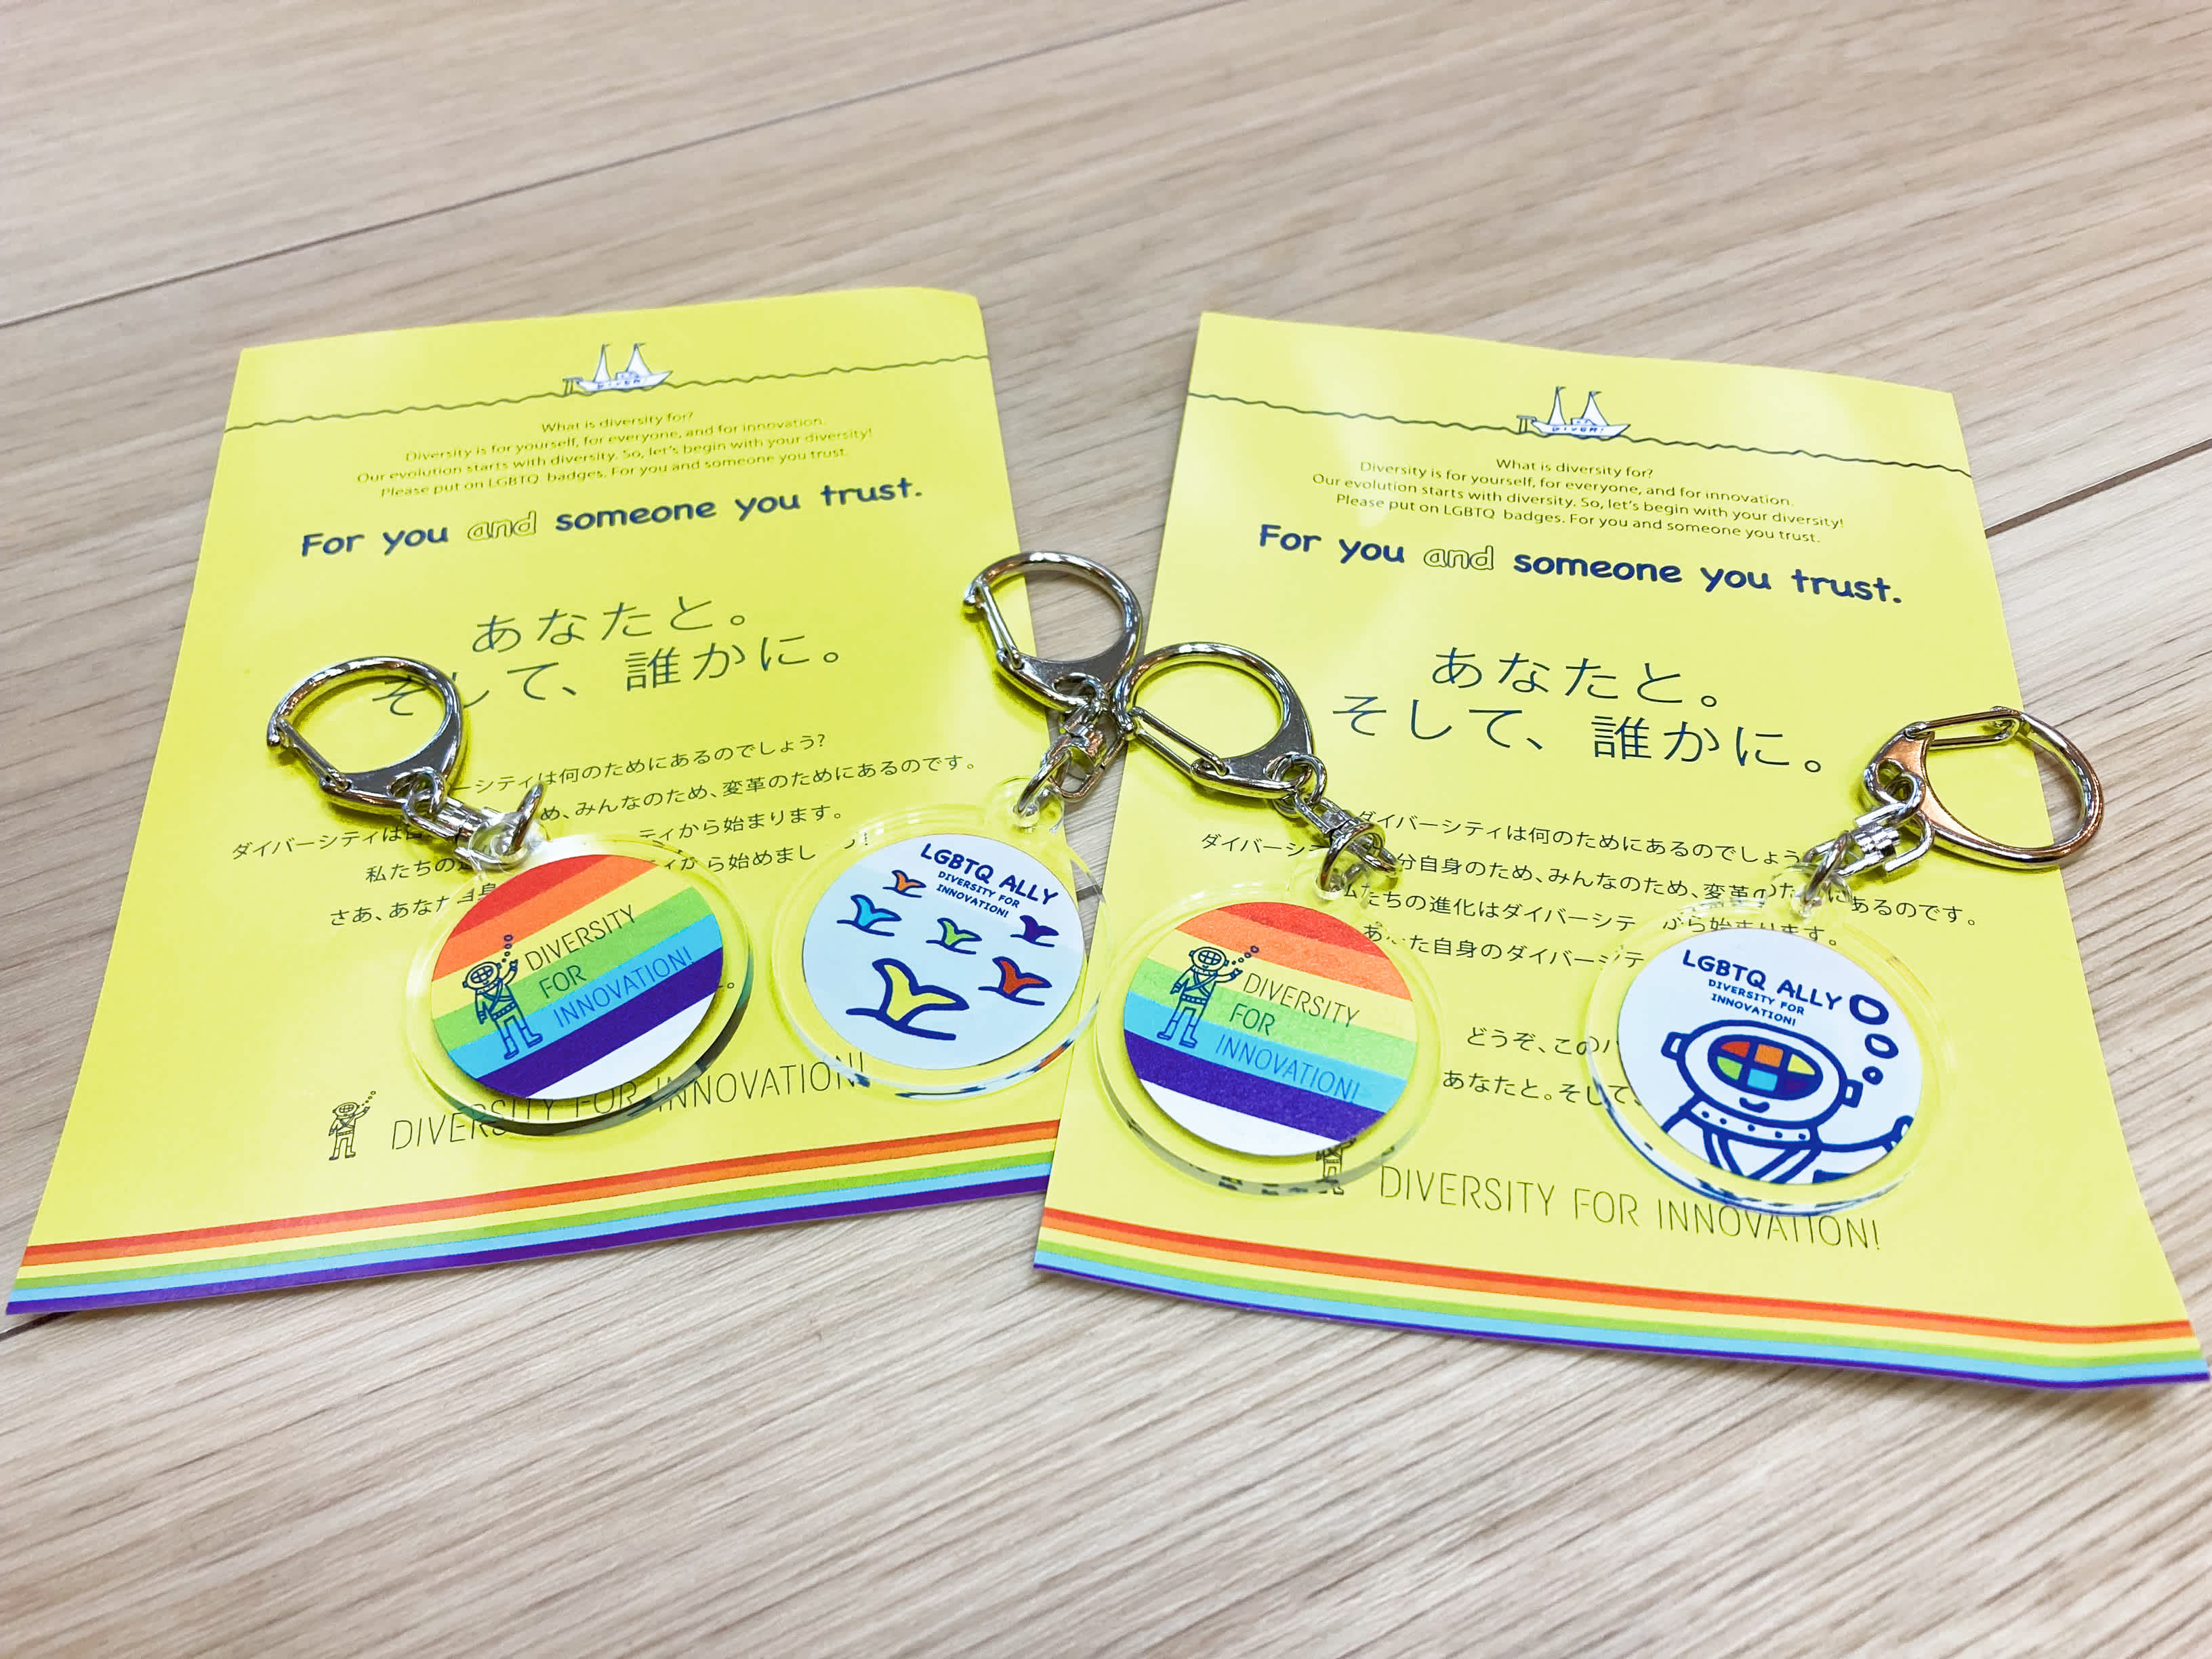 Recruit Co., Ltd. distributed two pairs of key chains to those who requested them